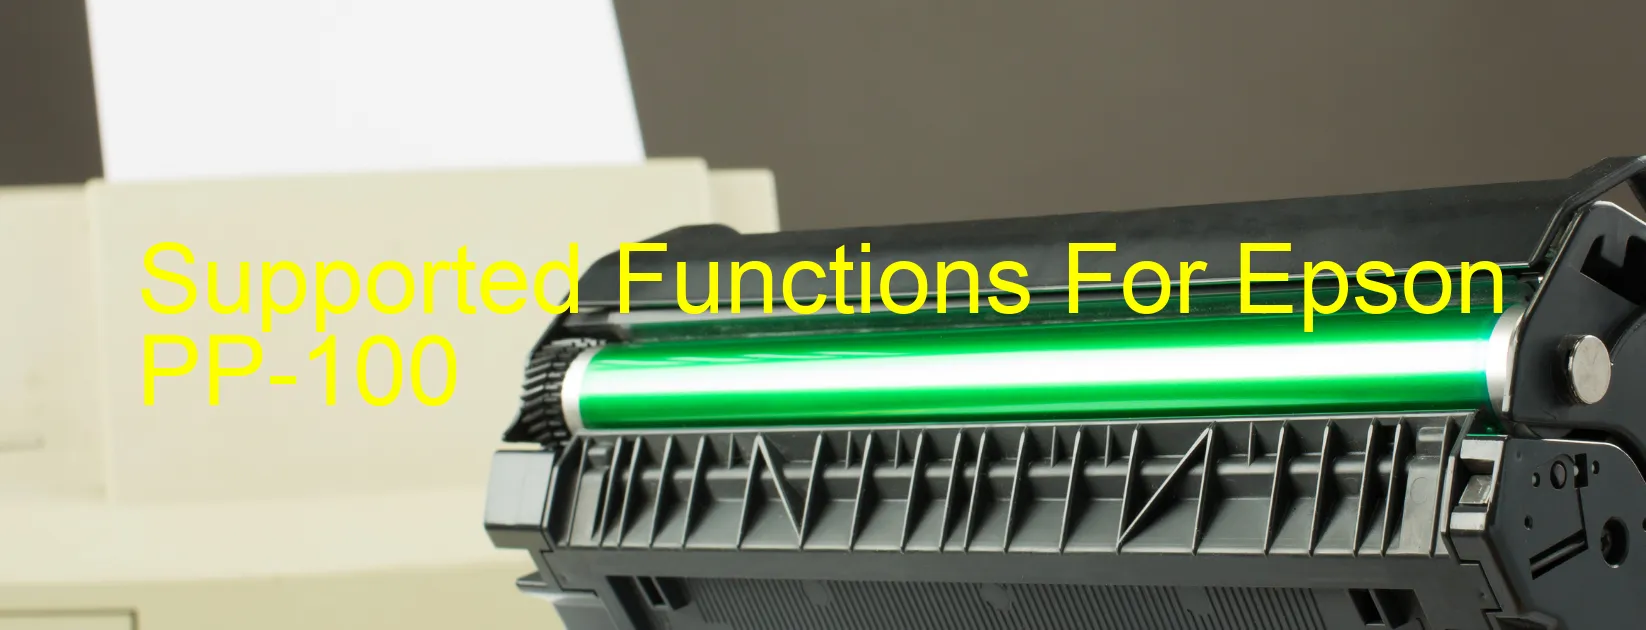 Epson PP-100 supported Functions